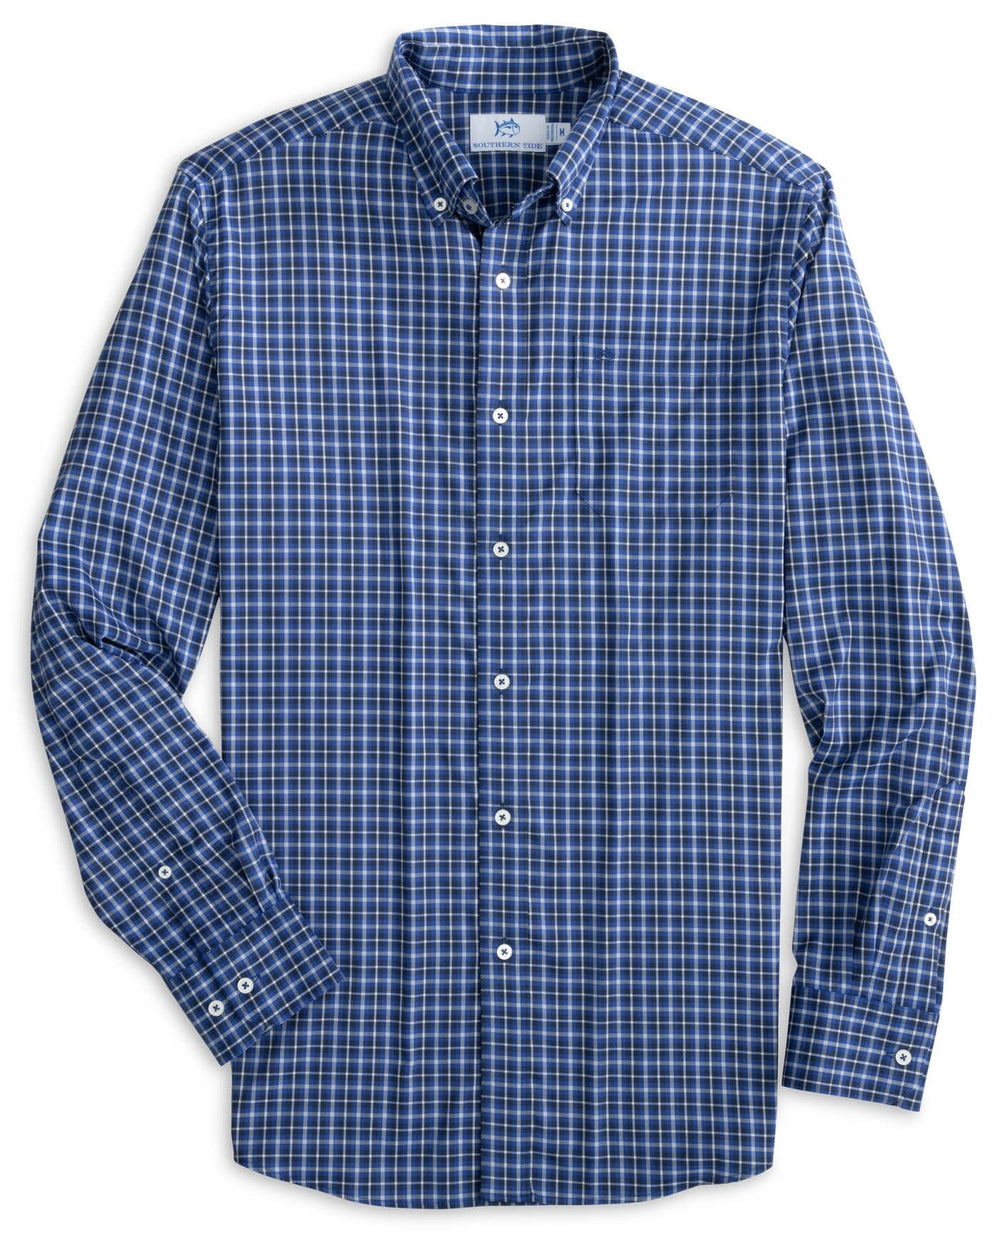 The front view of the Southern Tide Intercoastal Ardmore Plaid Long Sleeve Sportshirt by Southern Tide - Dress Blue